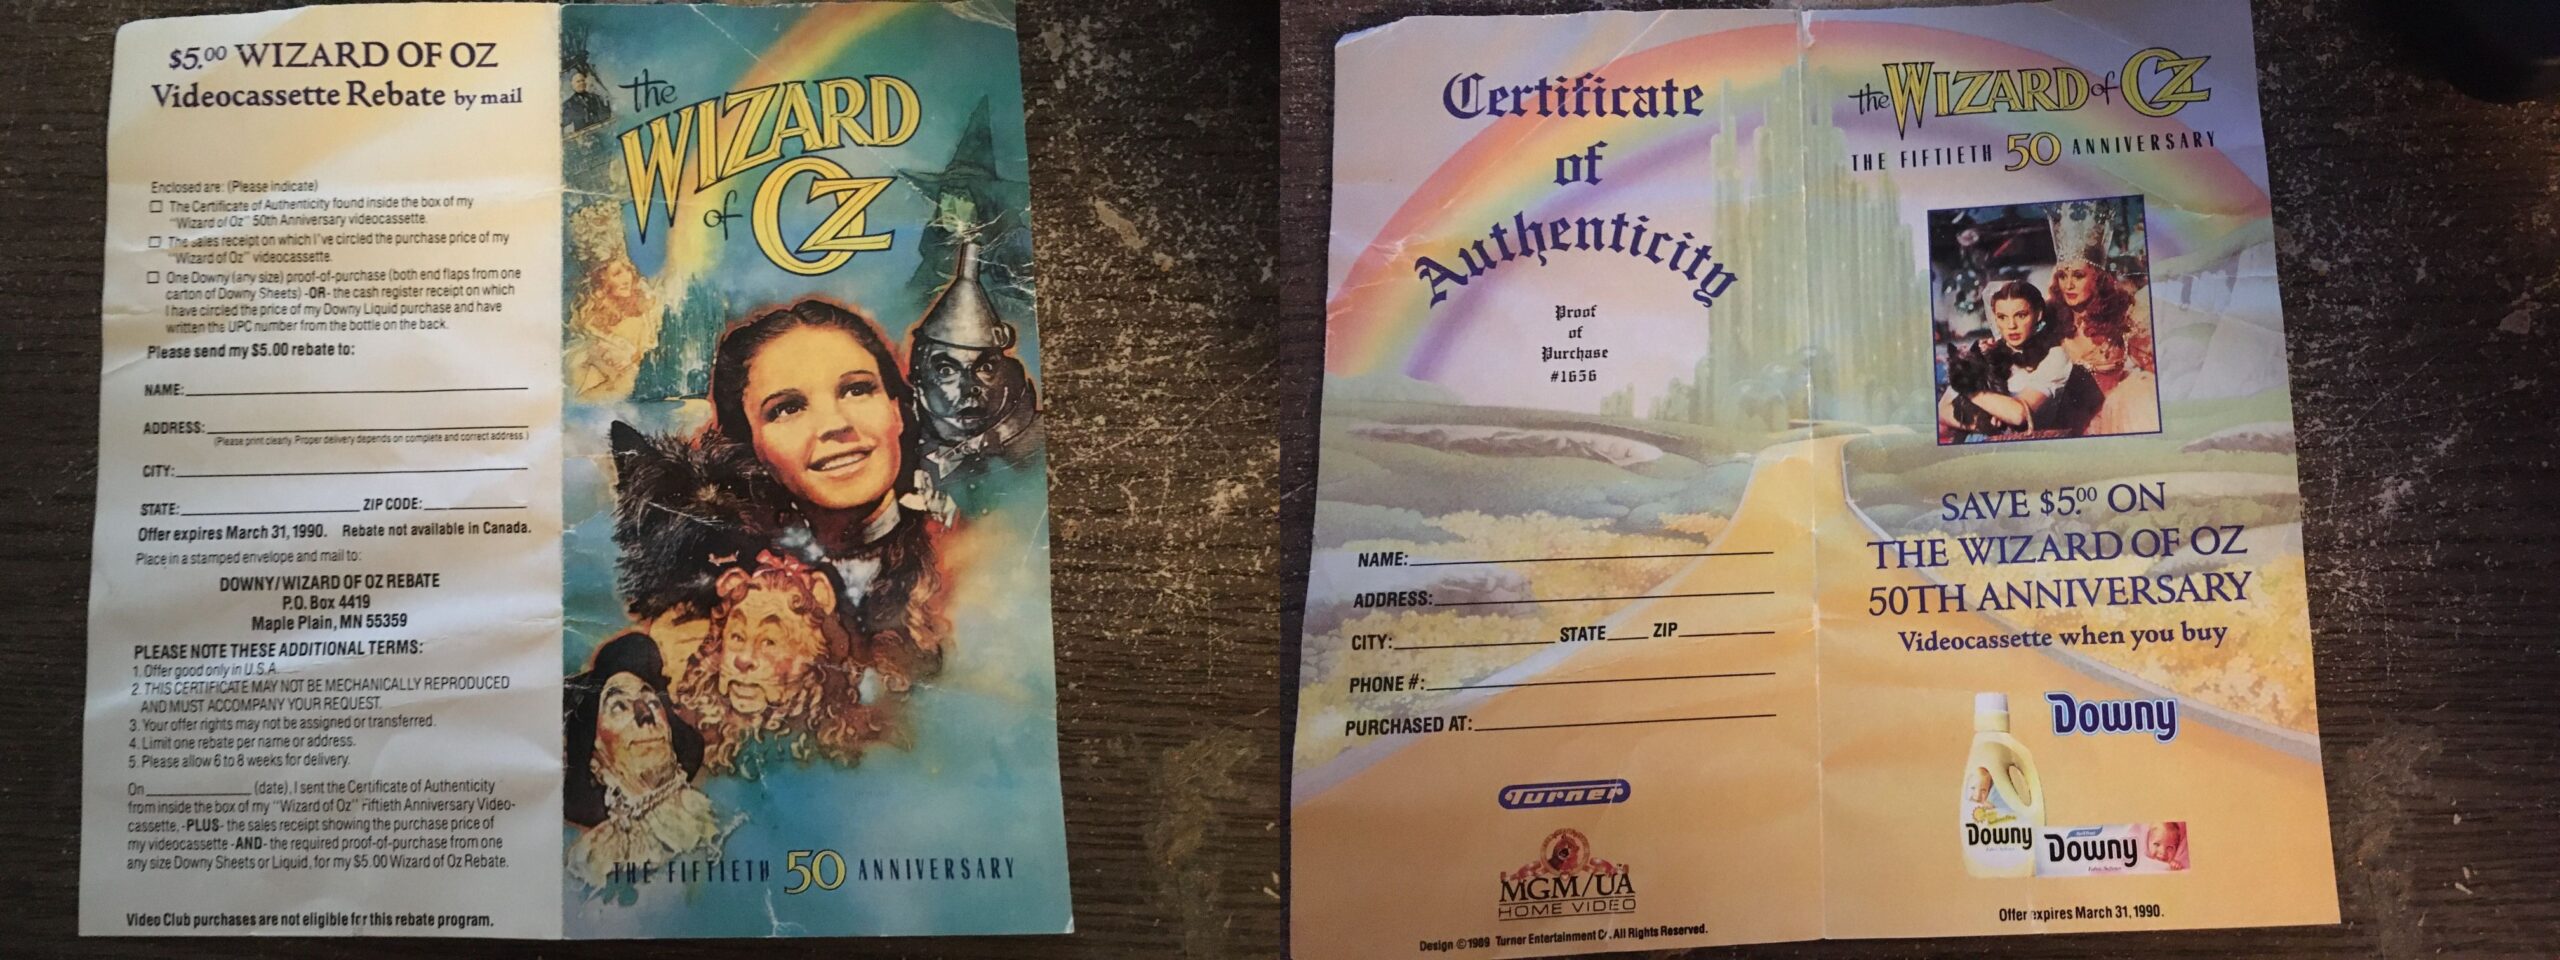 RCA Video Disc: The Wizard of Oz